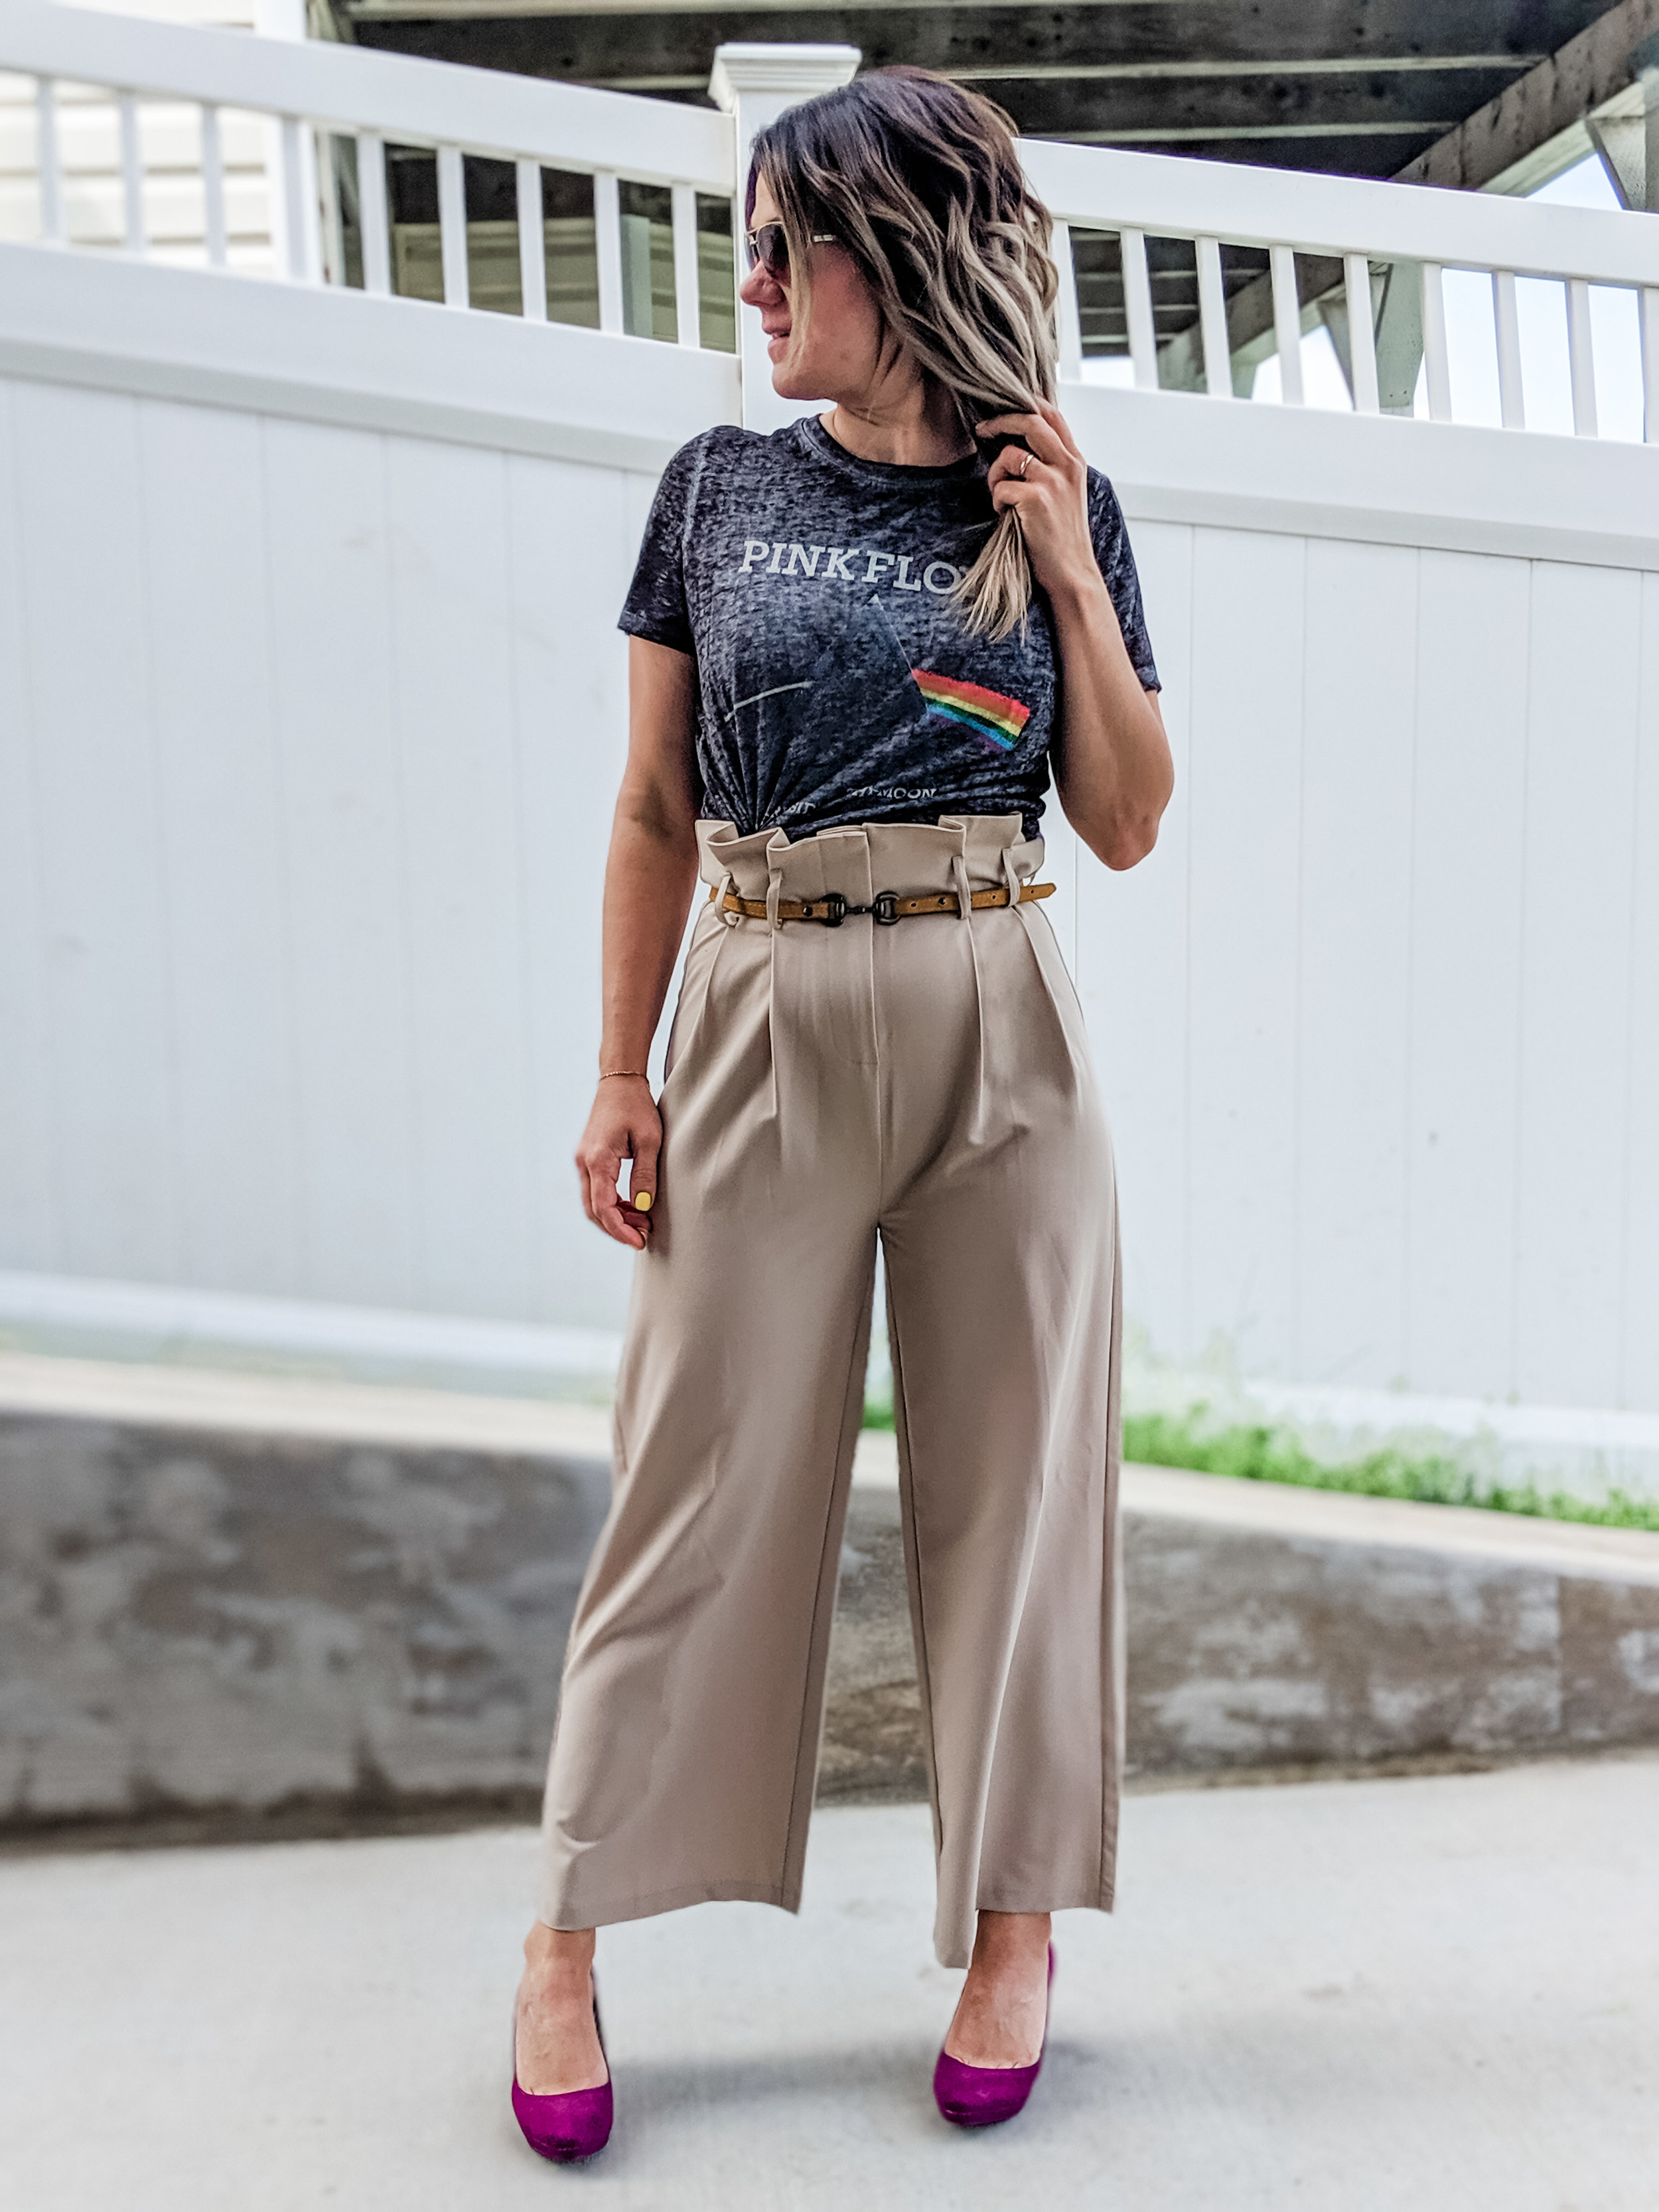 These $25 Paper Bag-Waist Pants Have Over 7,700 5-Star Amazon Reviews - E!  Online